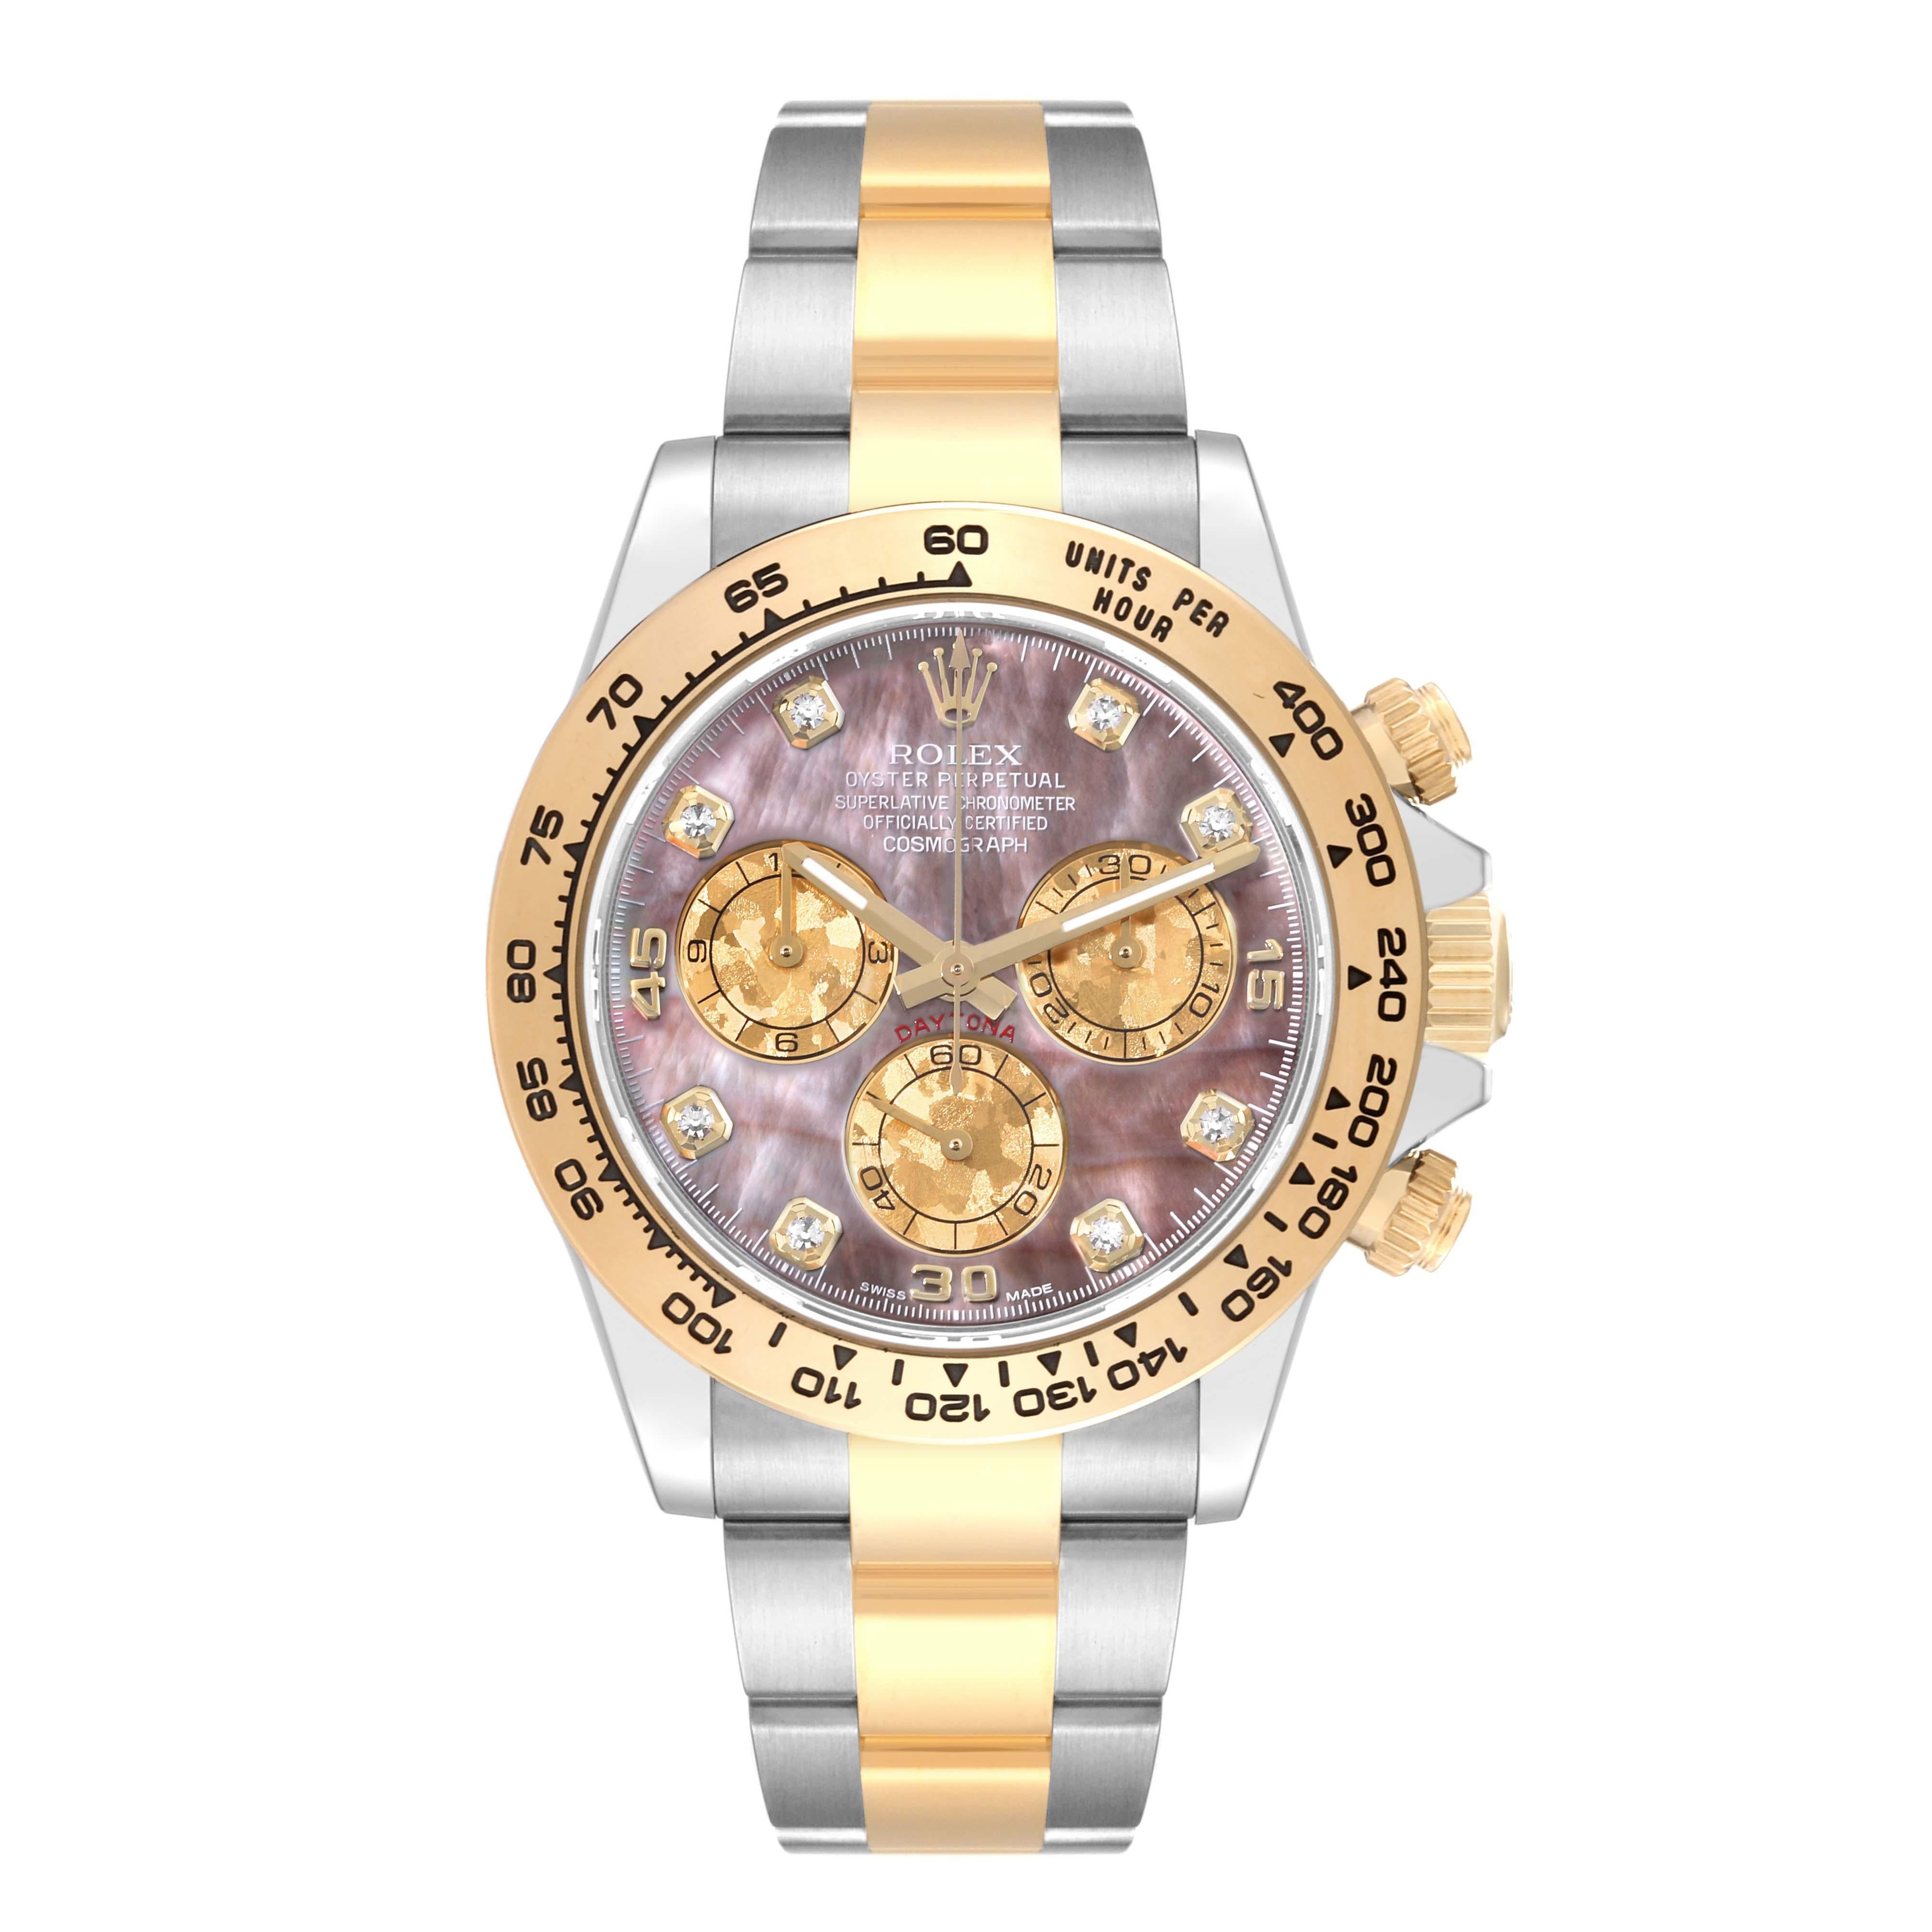 Rolex Daytona Steel Yellow Gold Mother Of Pearl Diamond Mens Watch 116503. Officially certified chronometer self-winding movement. Rhodium-plated, oeil-de-perdrix decoration, straight line lever escapement, monometallic balance adjusted to 5